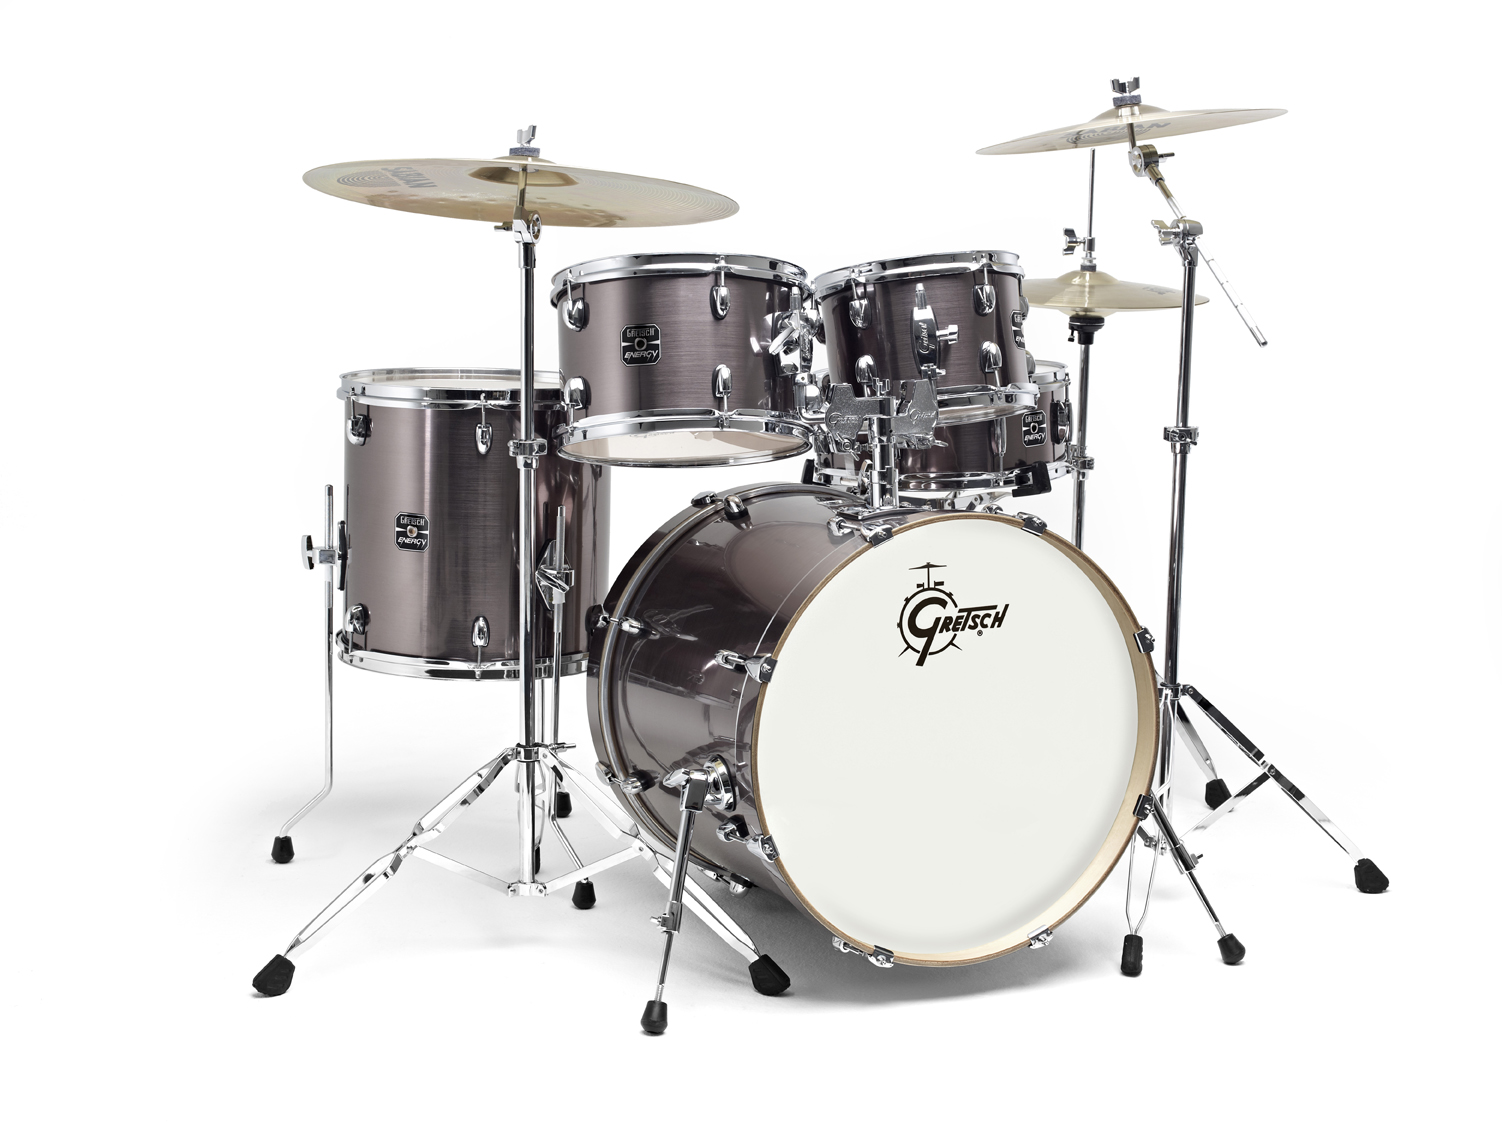 GRETSCH DRUMS GE2-E605TK-GS - NEW ENERGY FUSION 20